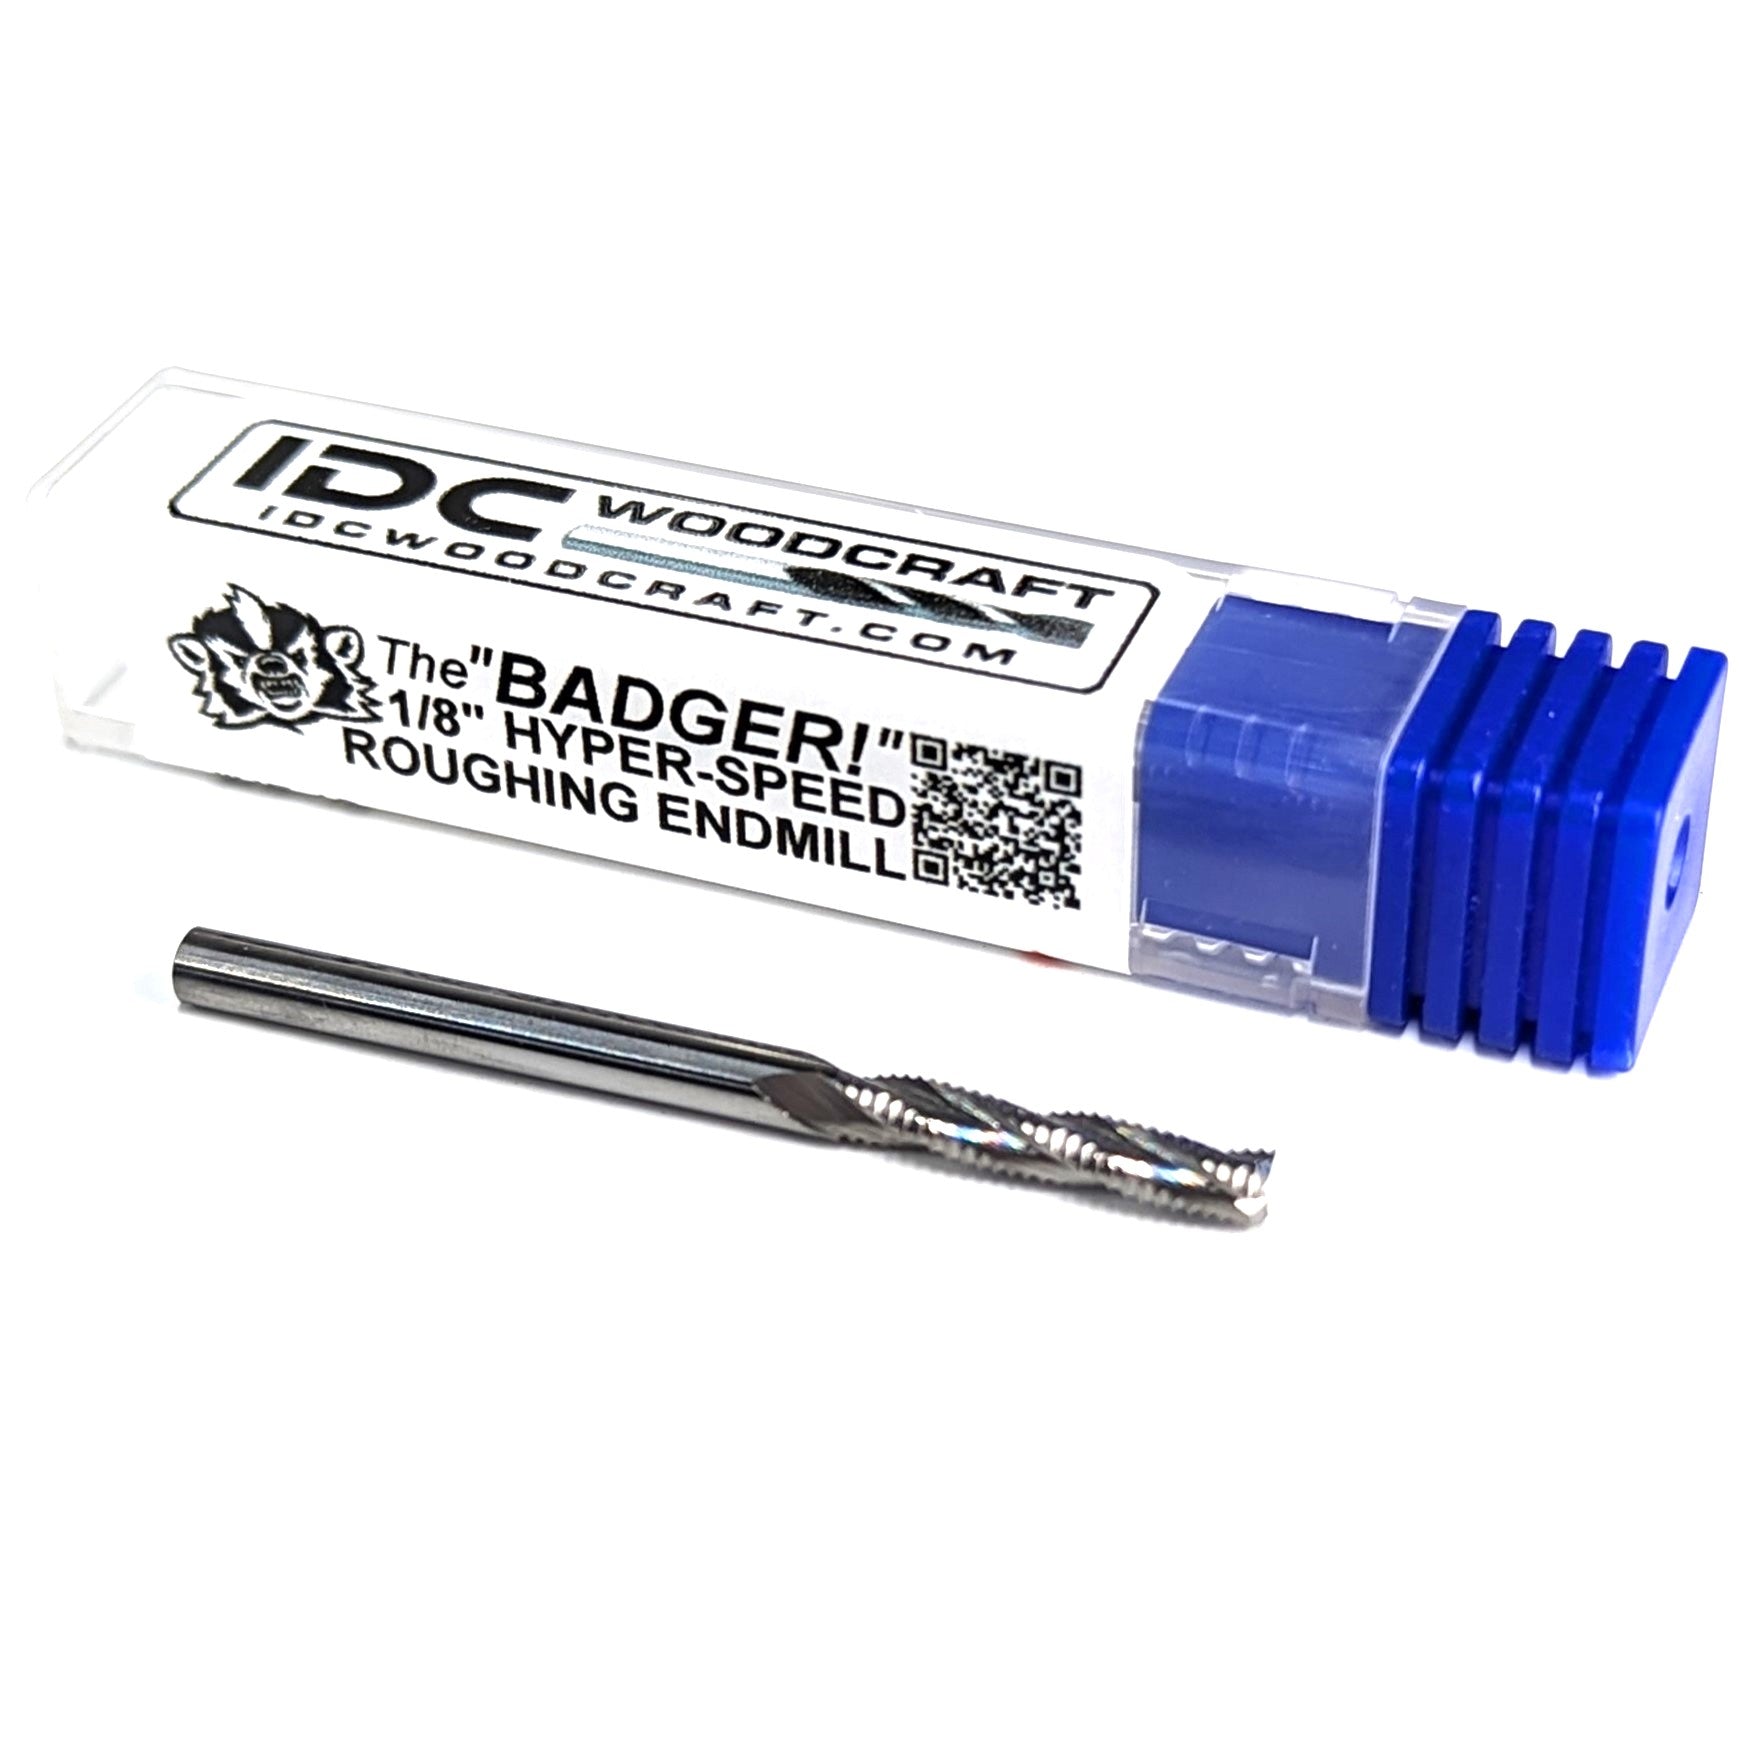 The "BADGER" 1/8 High-Speed Roughing CNC Router Bit, 1/8 Shank